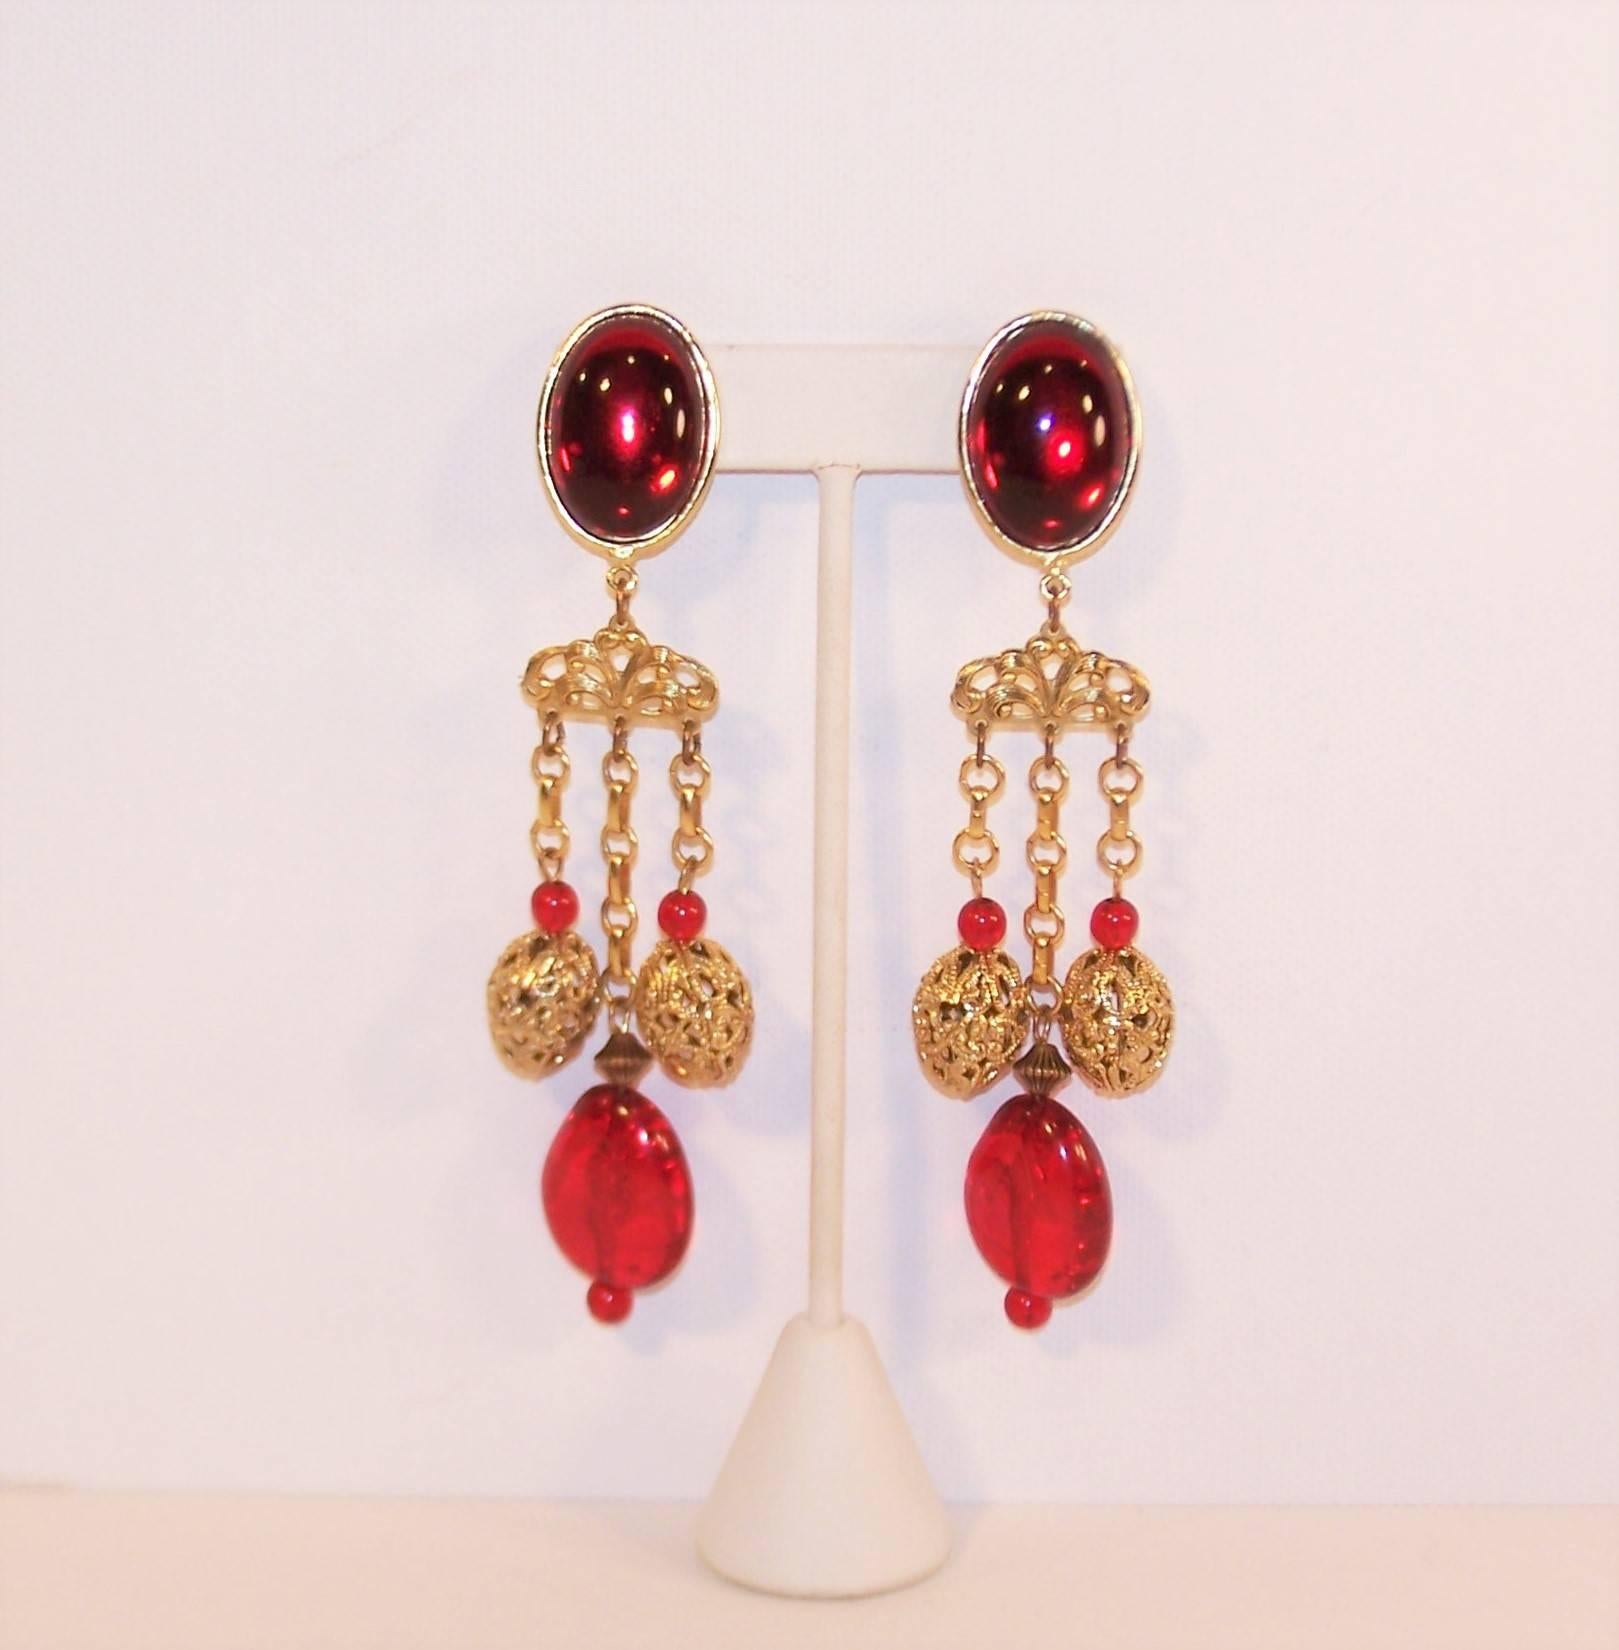 Exotic glamour abounds in these 1980's earrings by Amy Jo of New York.  The 5